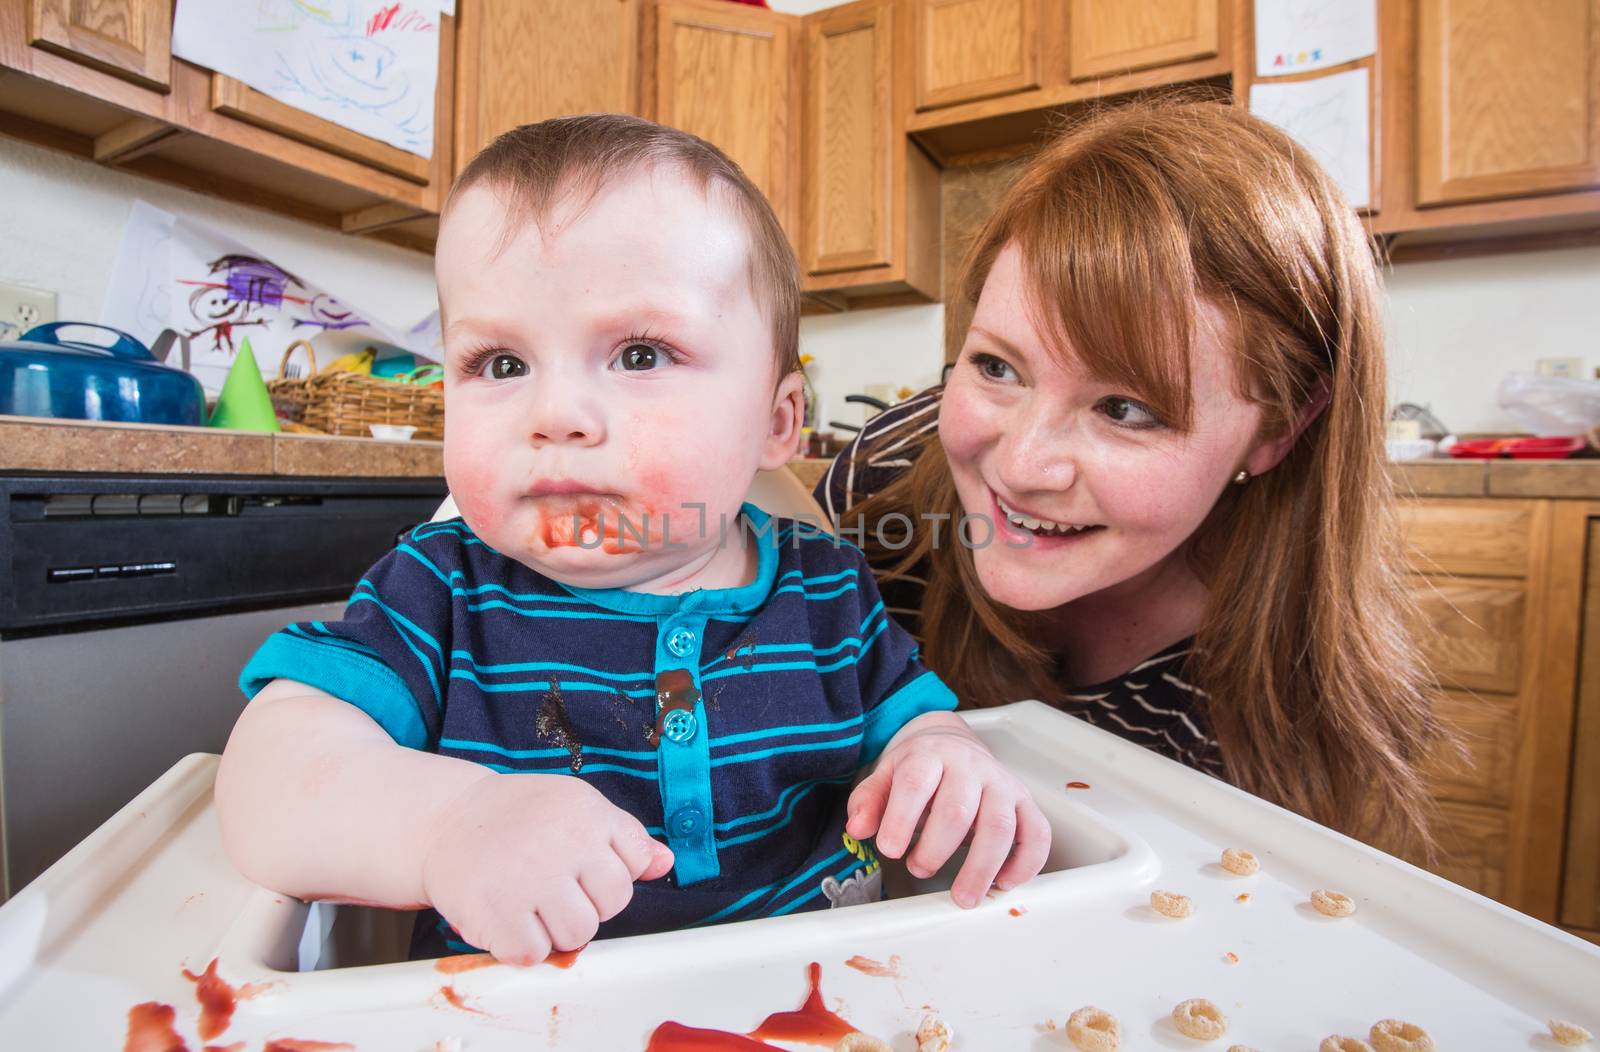 Woman Feeds Baby in Kitchen by Creatista